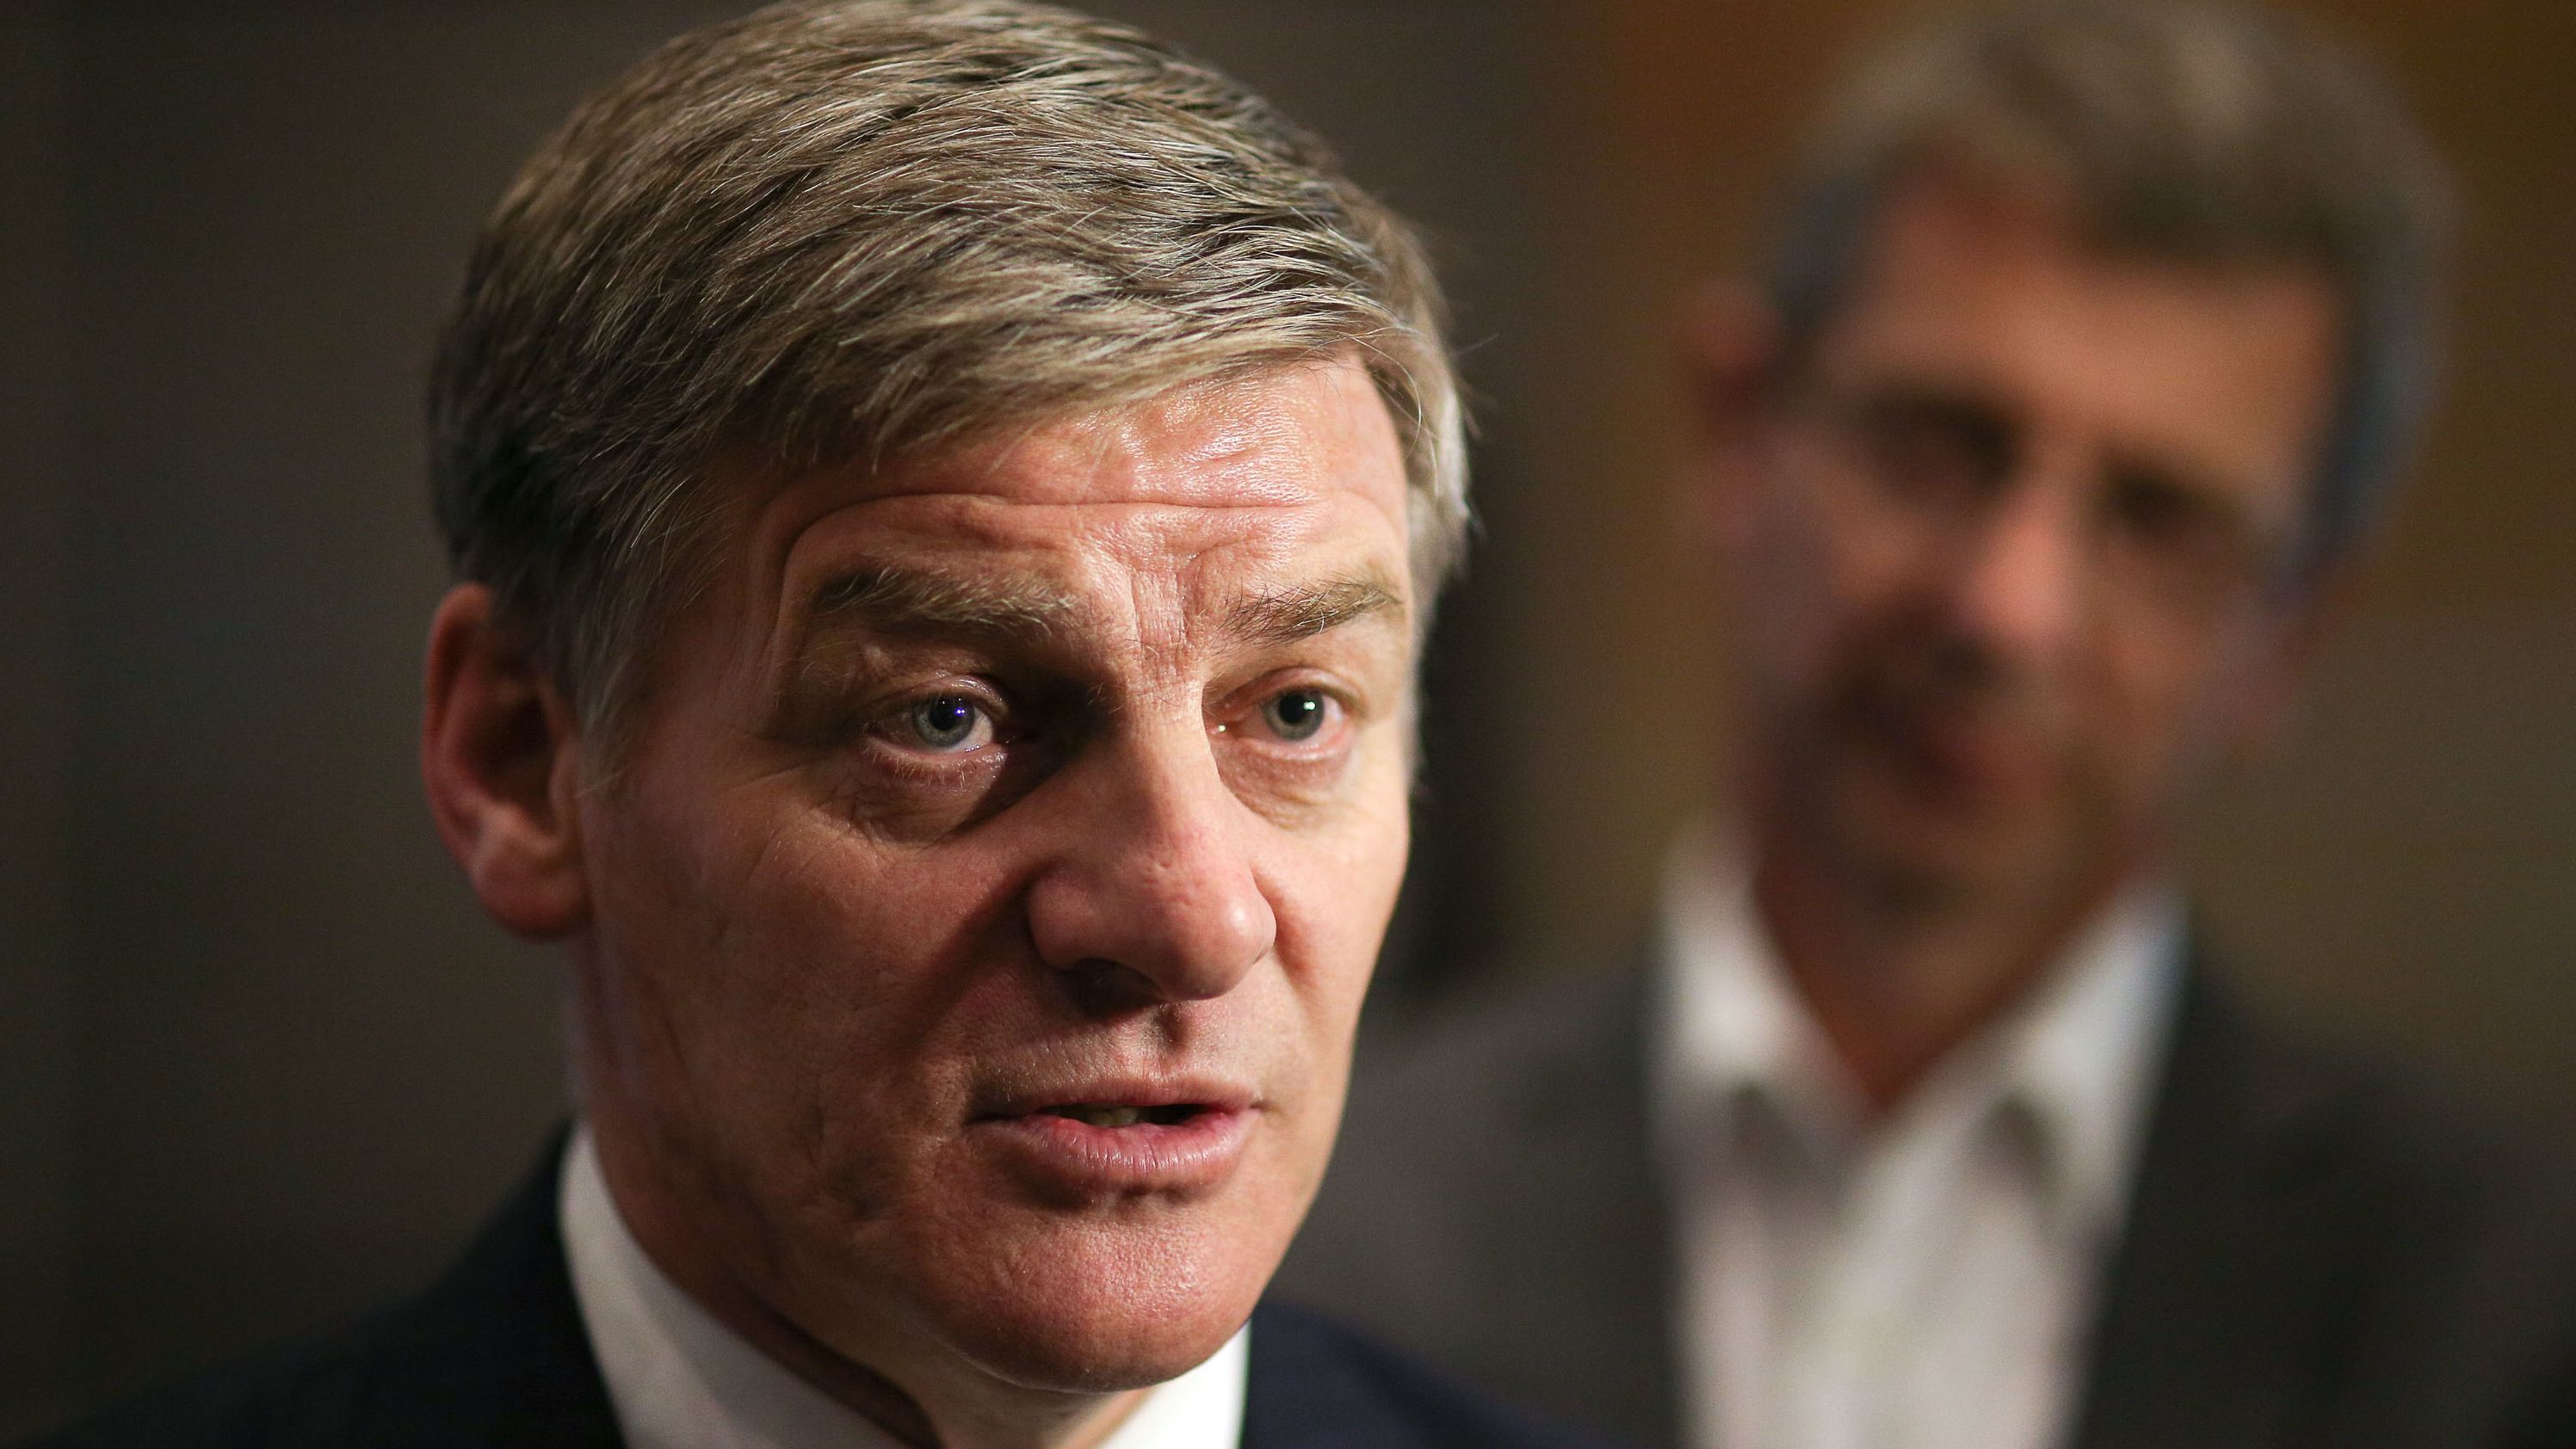 Finance Minister Bill English during a post-budget breakfast, Wellington, May 27, 2016.